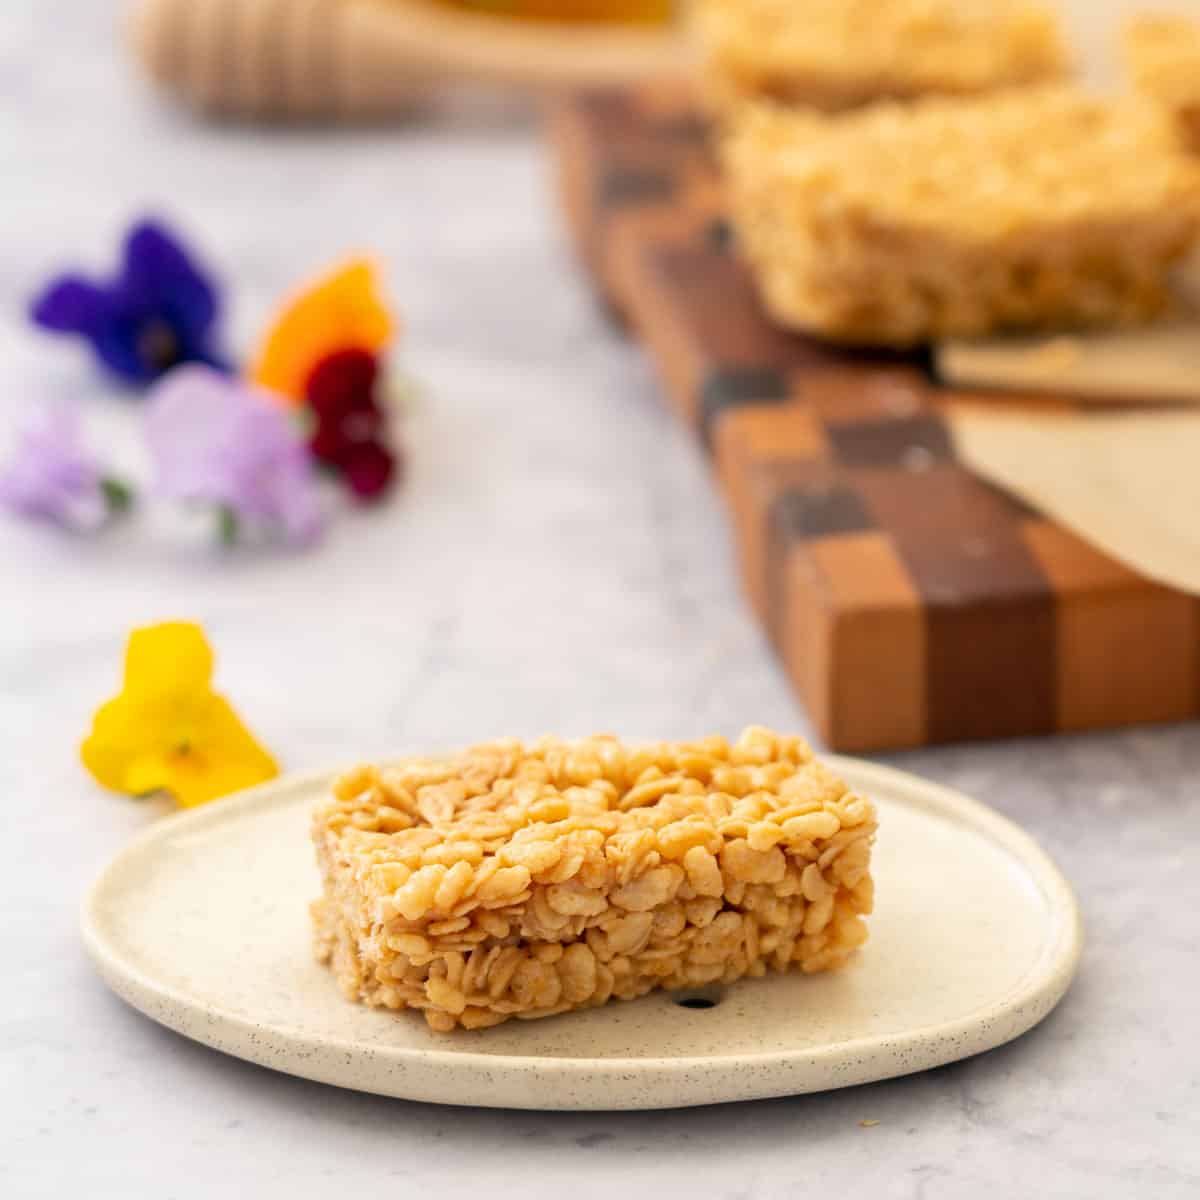 A piece of peanut butter rice krispie slice on a side plate next to a handful of edible flowers.